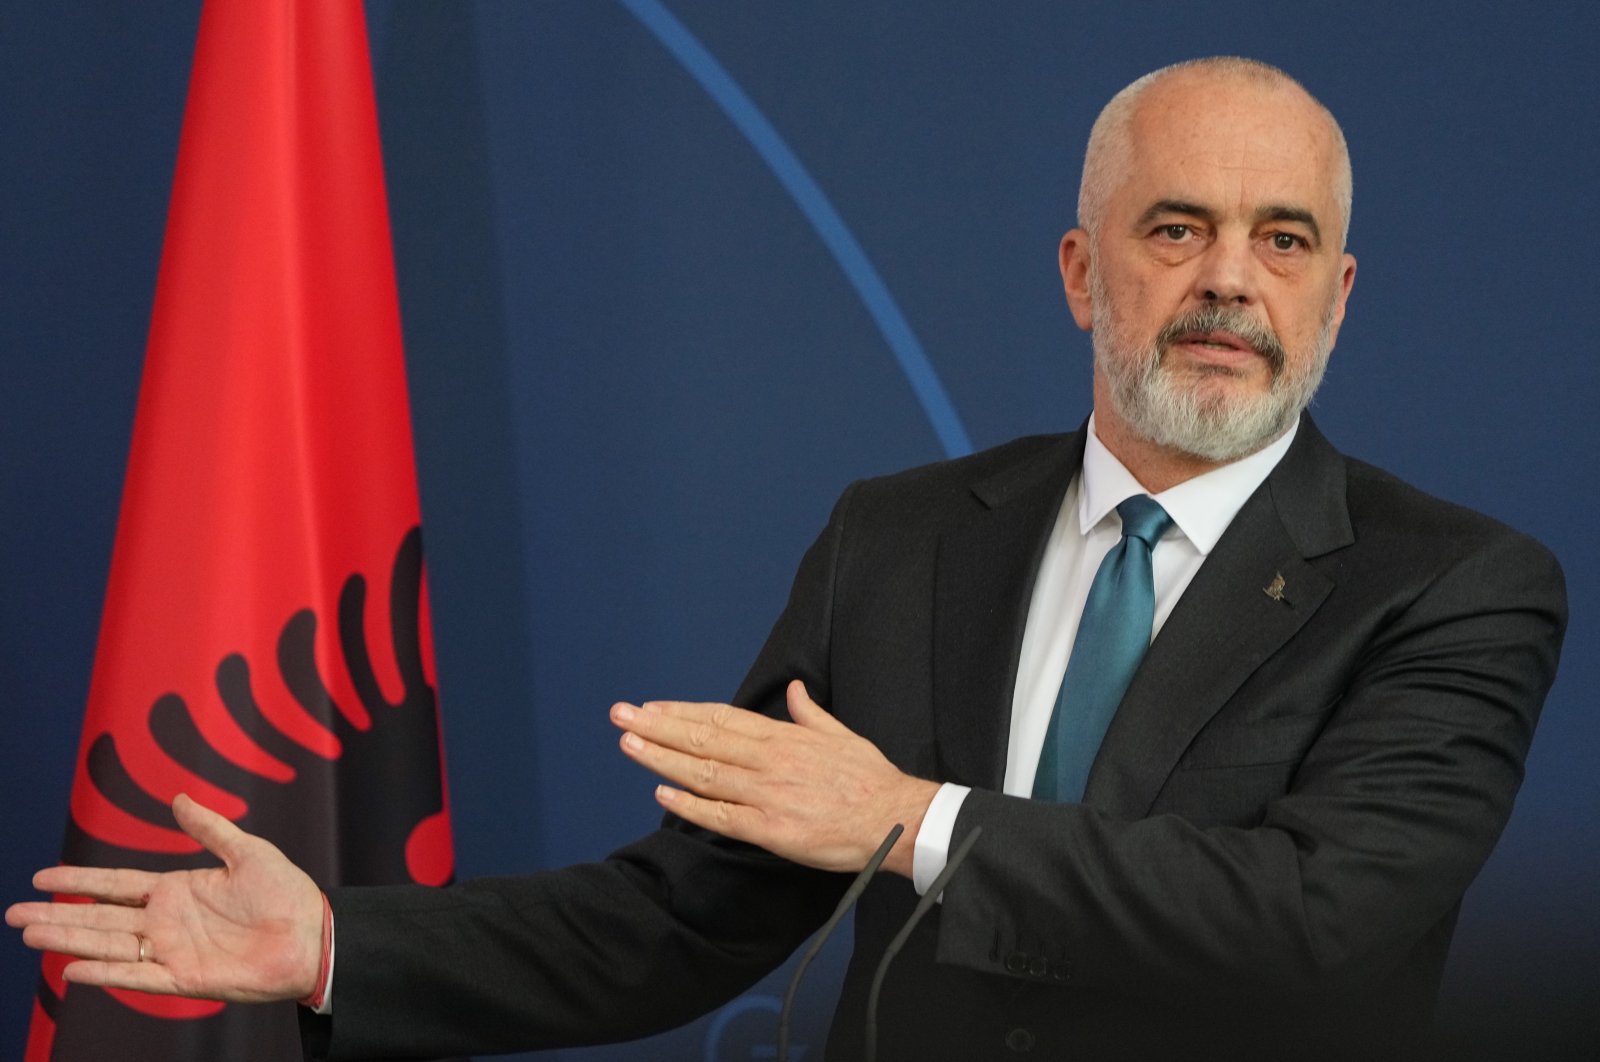 Albanian PrimeMinister Edi Rama speaks during a joint press conference with German Chancellor Olaf Scholz, after their meeting in the Federal Chancellery in Berlin, Germany, April 11, 2022.  (EPA Photo)